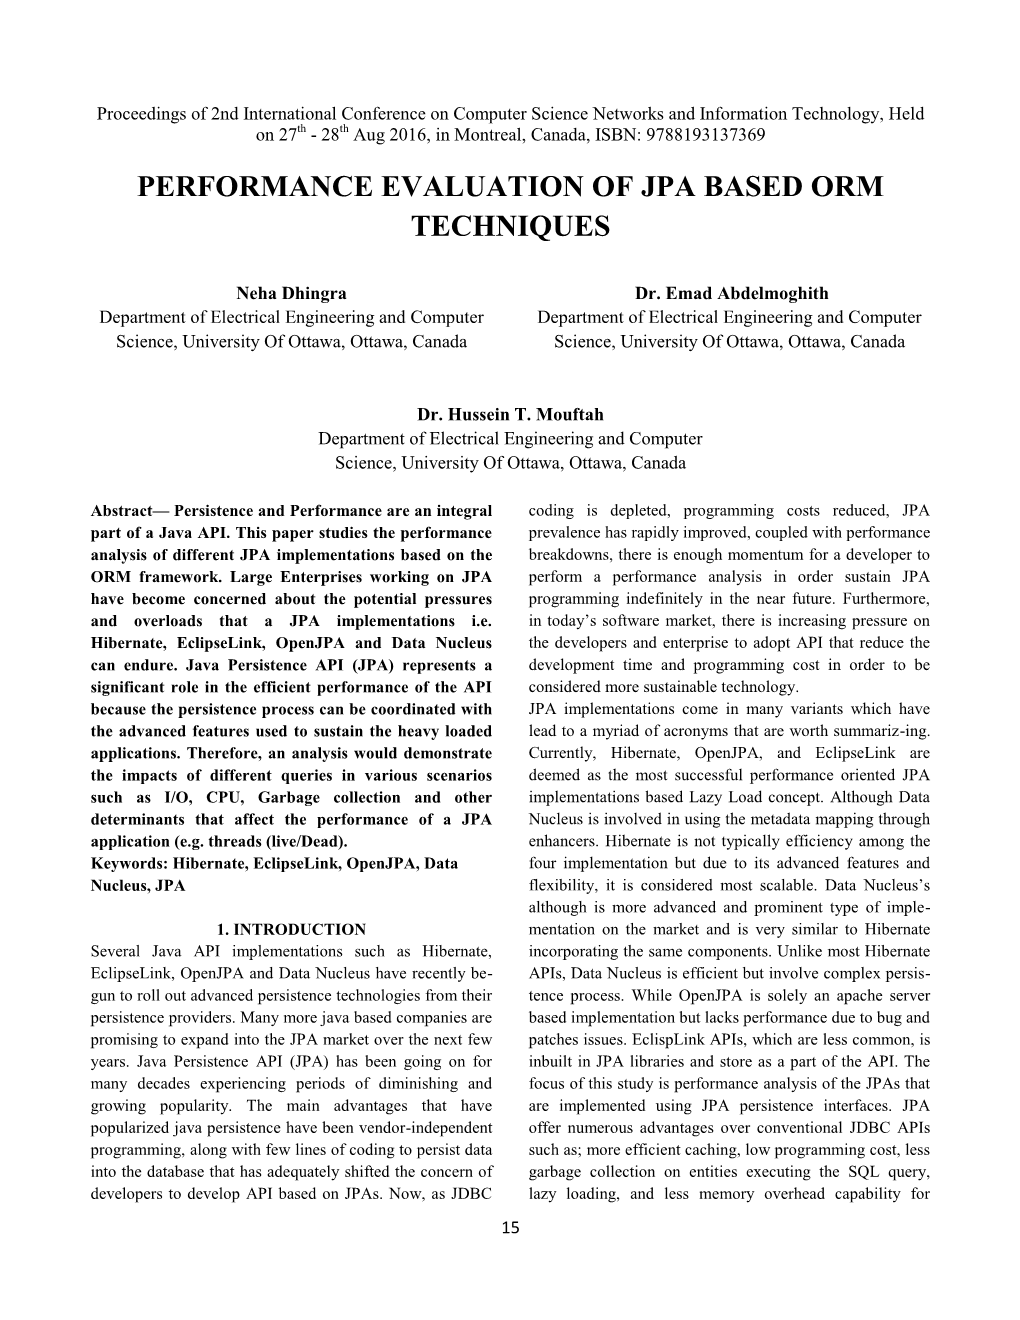 Performance Evaluation of Jpa Based Orm Techniques